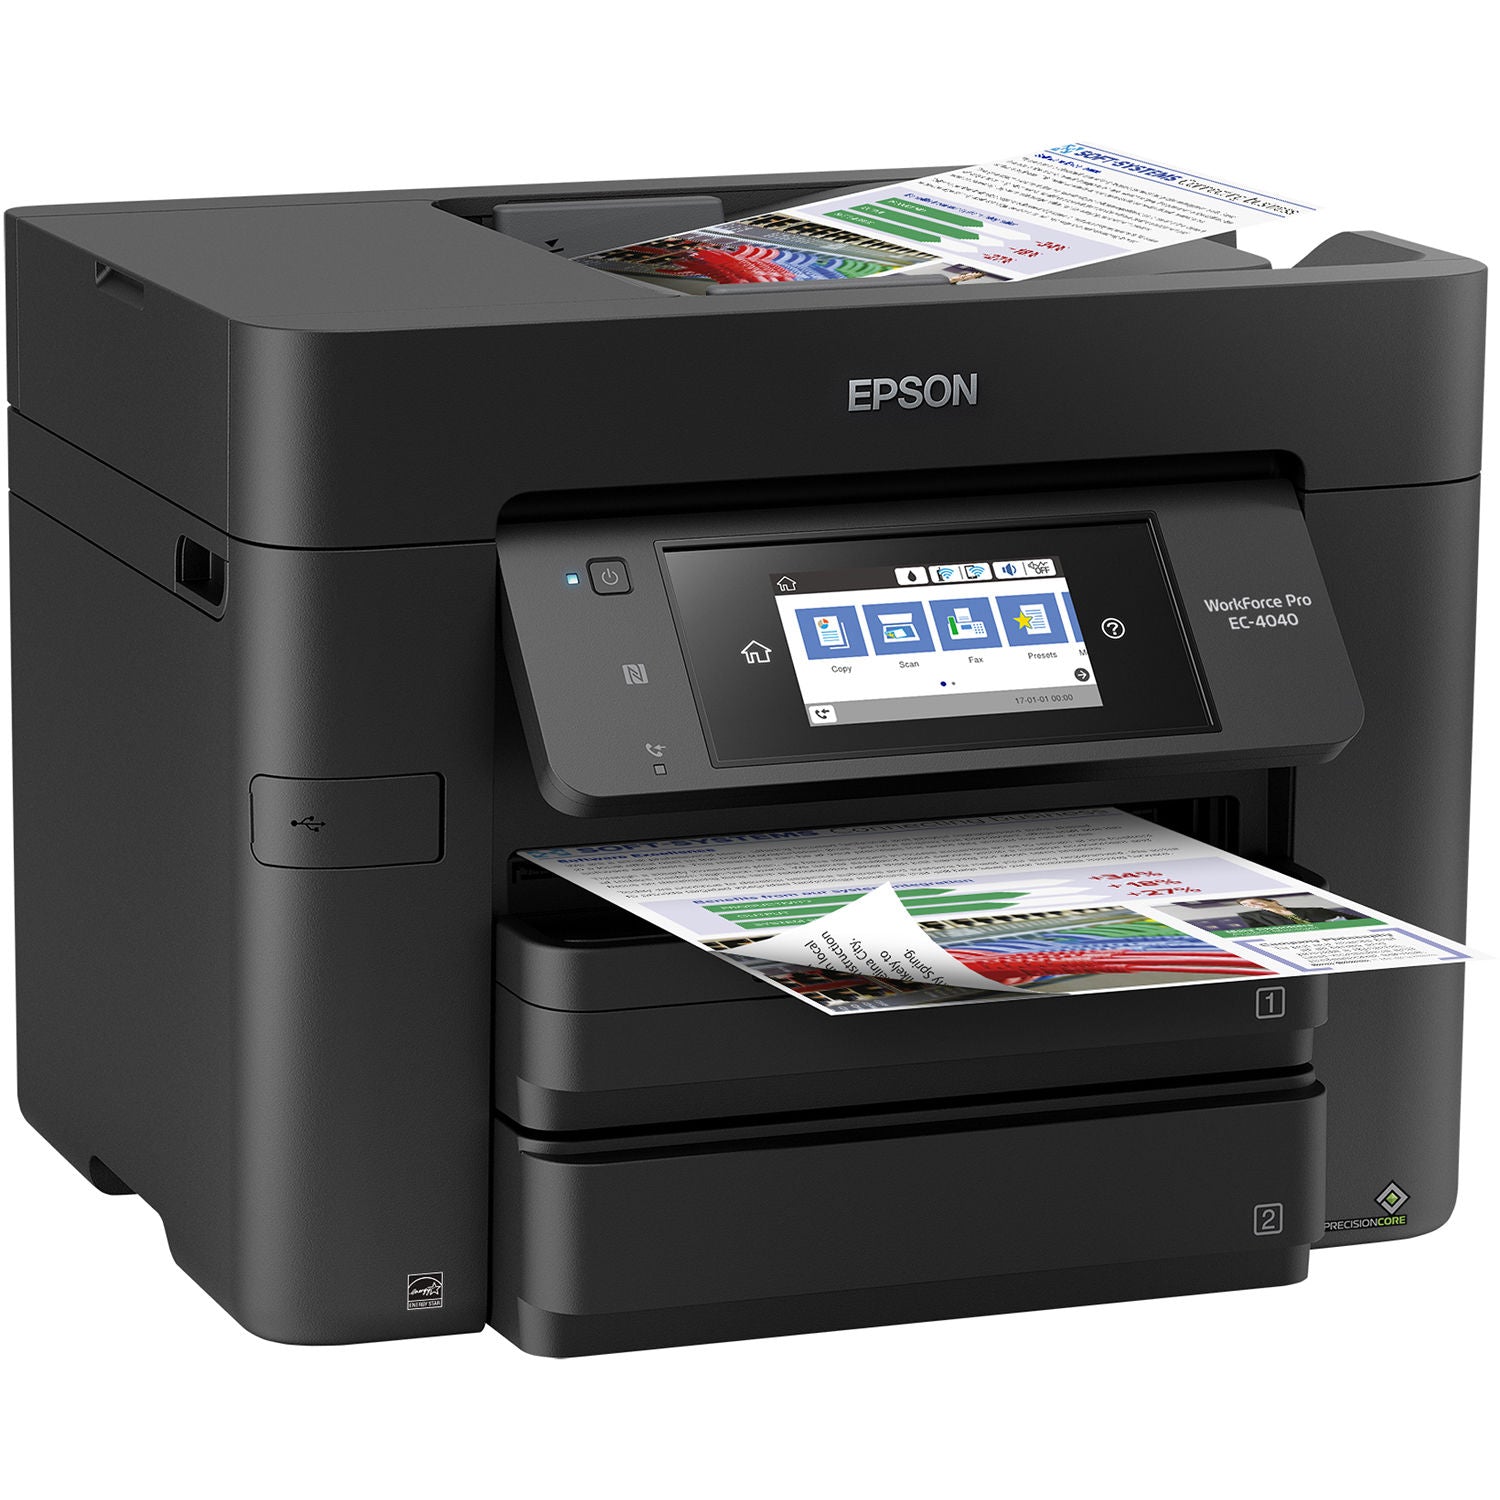 Absolute Toner New Epson High-Speed WorkForce Pro EC-4040 Color Inkjet Multifunction Printer Copier Scanner, Fax With Two Trays And Color Touchscreen, C11CF75203 Showroom Color Copier